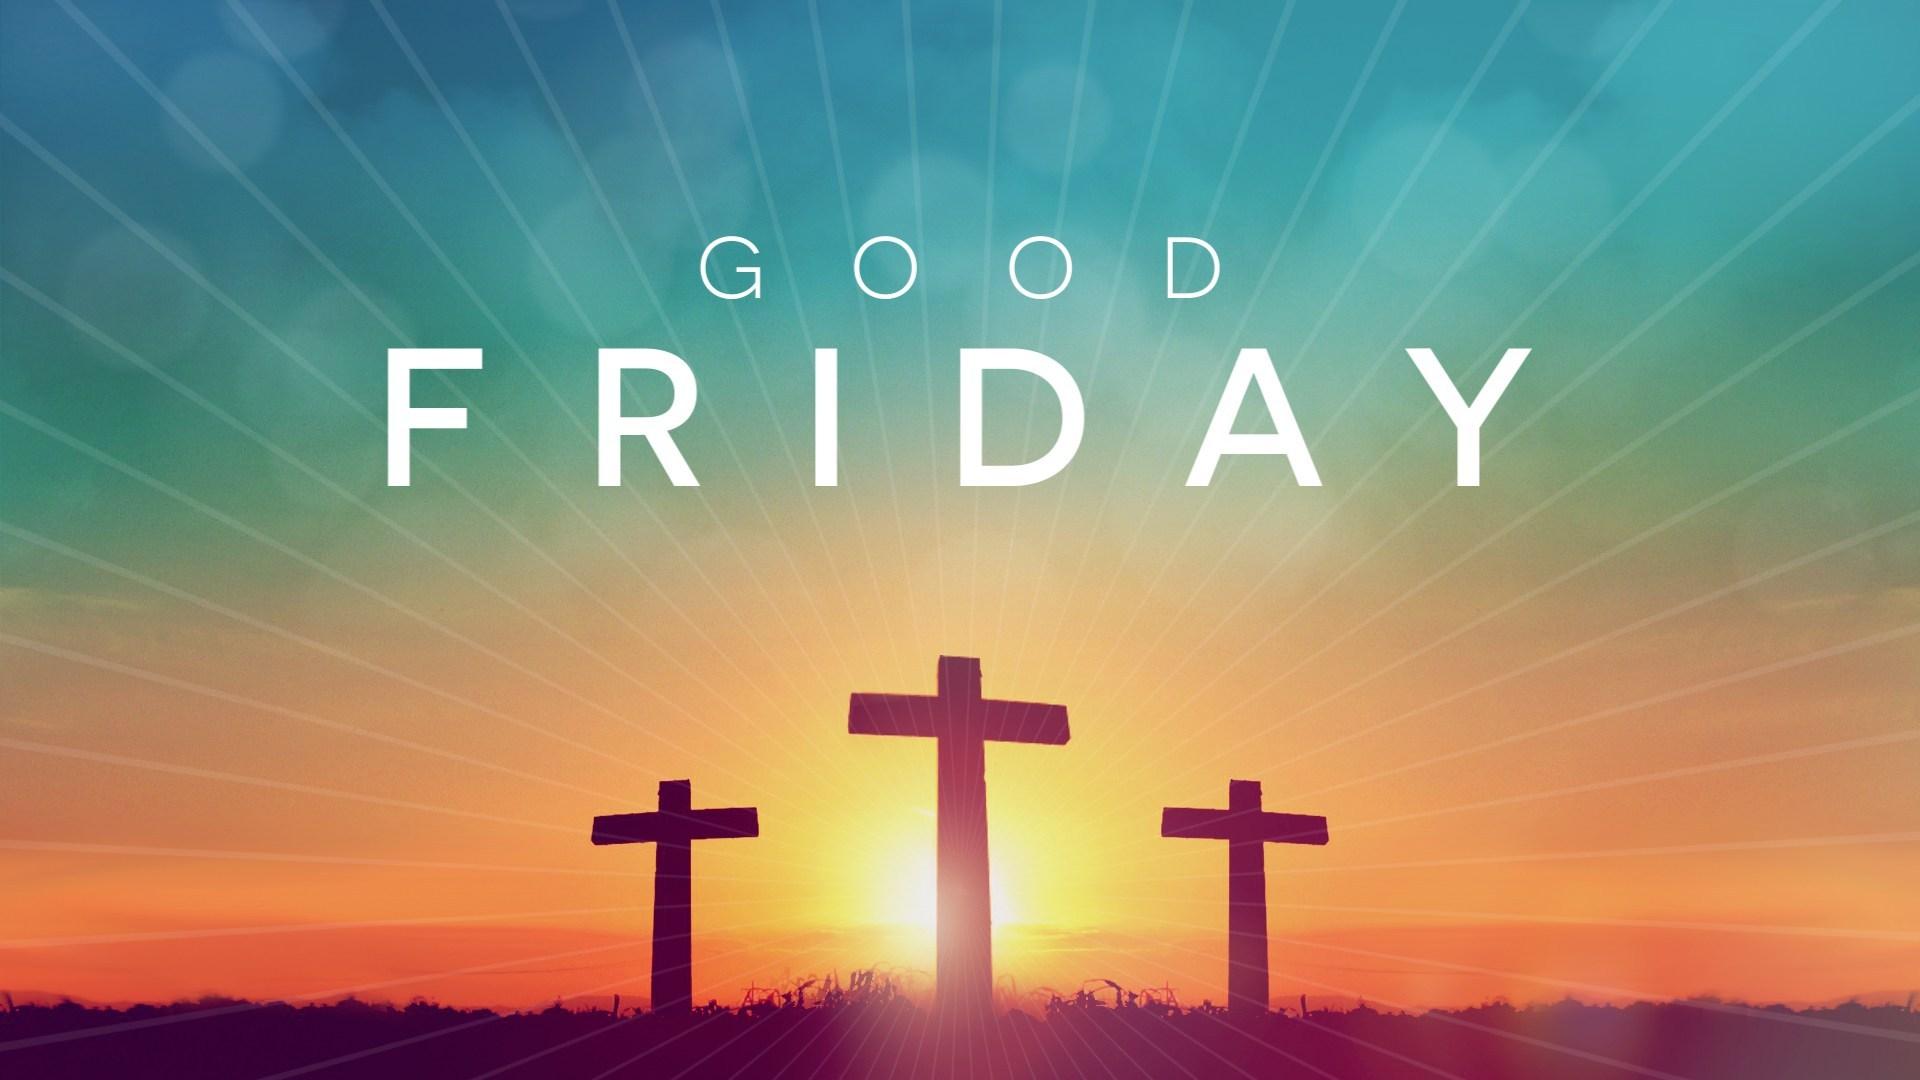 Happy Good Friday Image 2019. Good Friday Photo Picture HD